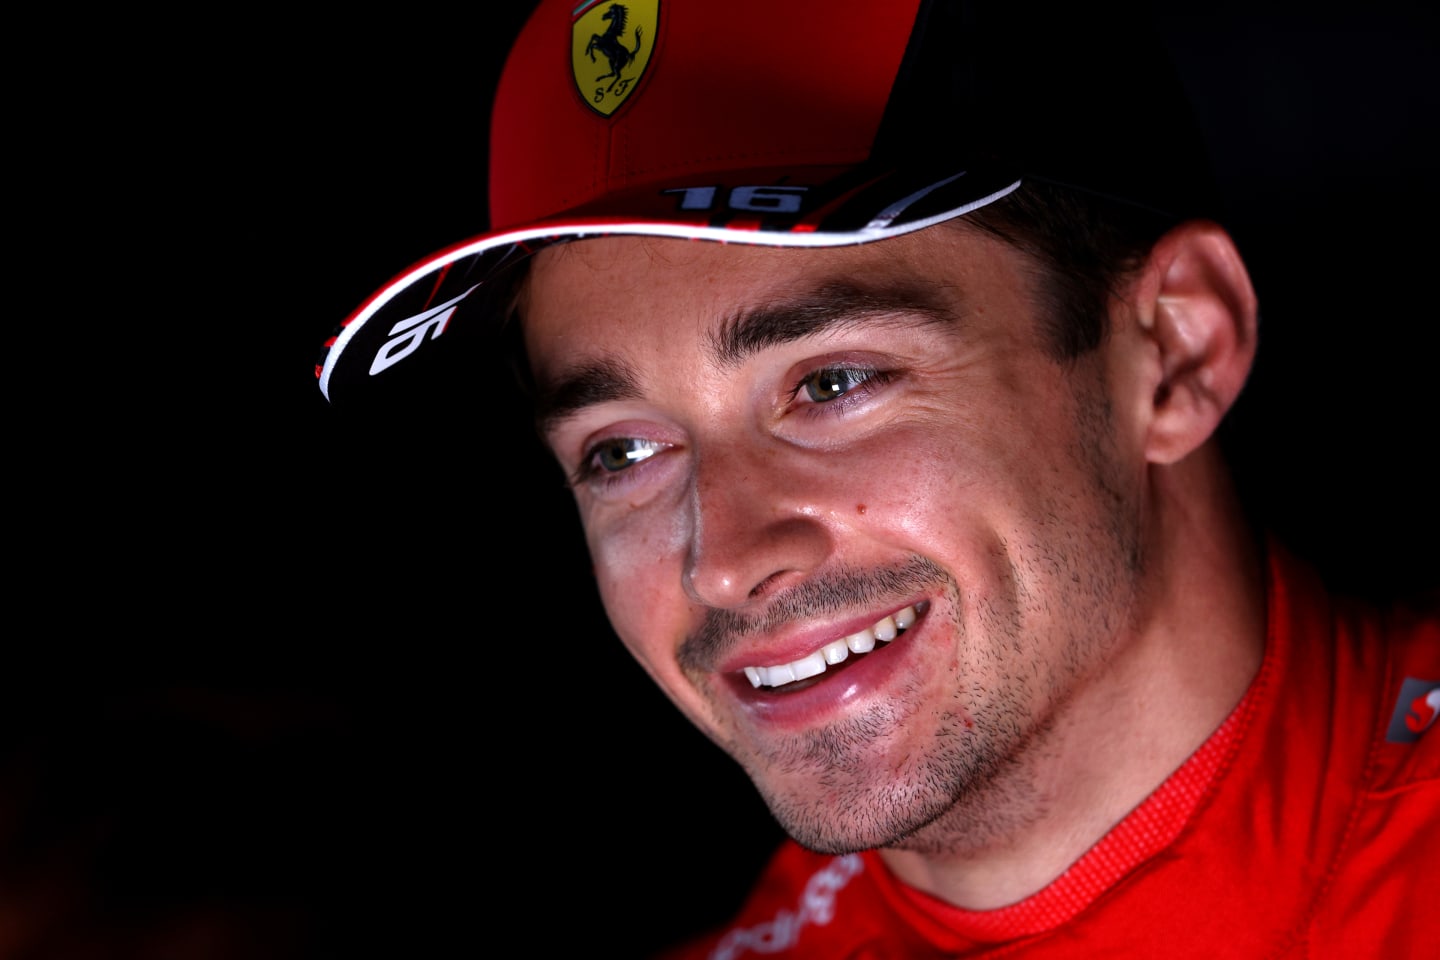 BAKU, AZERBAIJAN - JUNE 11: Pole position qualifier Charles Leclerc of Monaco and Ferrari talks to the media in the Paddock after qualifying ahead of the F1 Grand Prix of Azerbaijan at Baku City Circuit on June 11, 2022 in Baku, Azerbaijan. (Photo by Clive Rose/Getty Images)